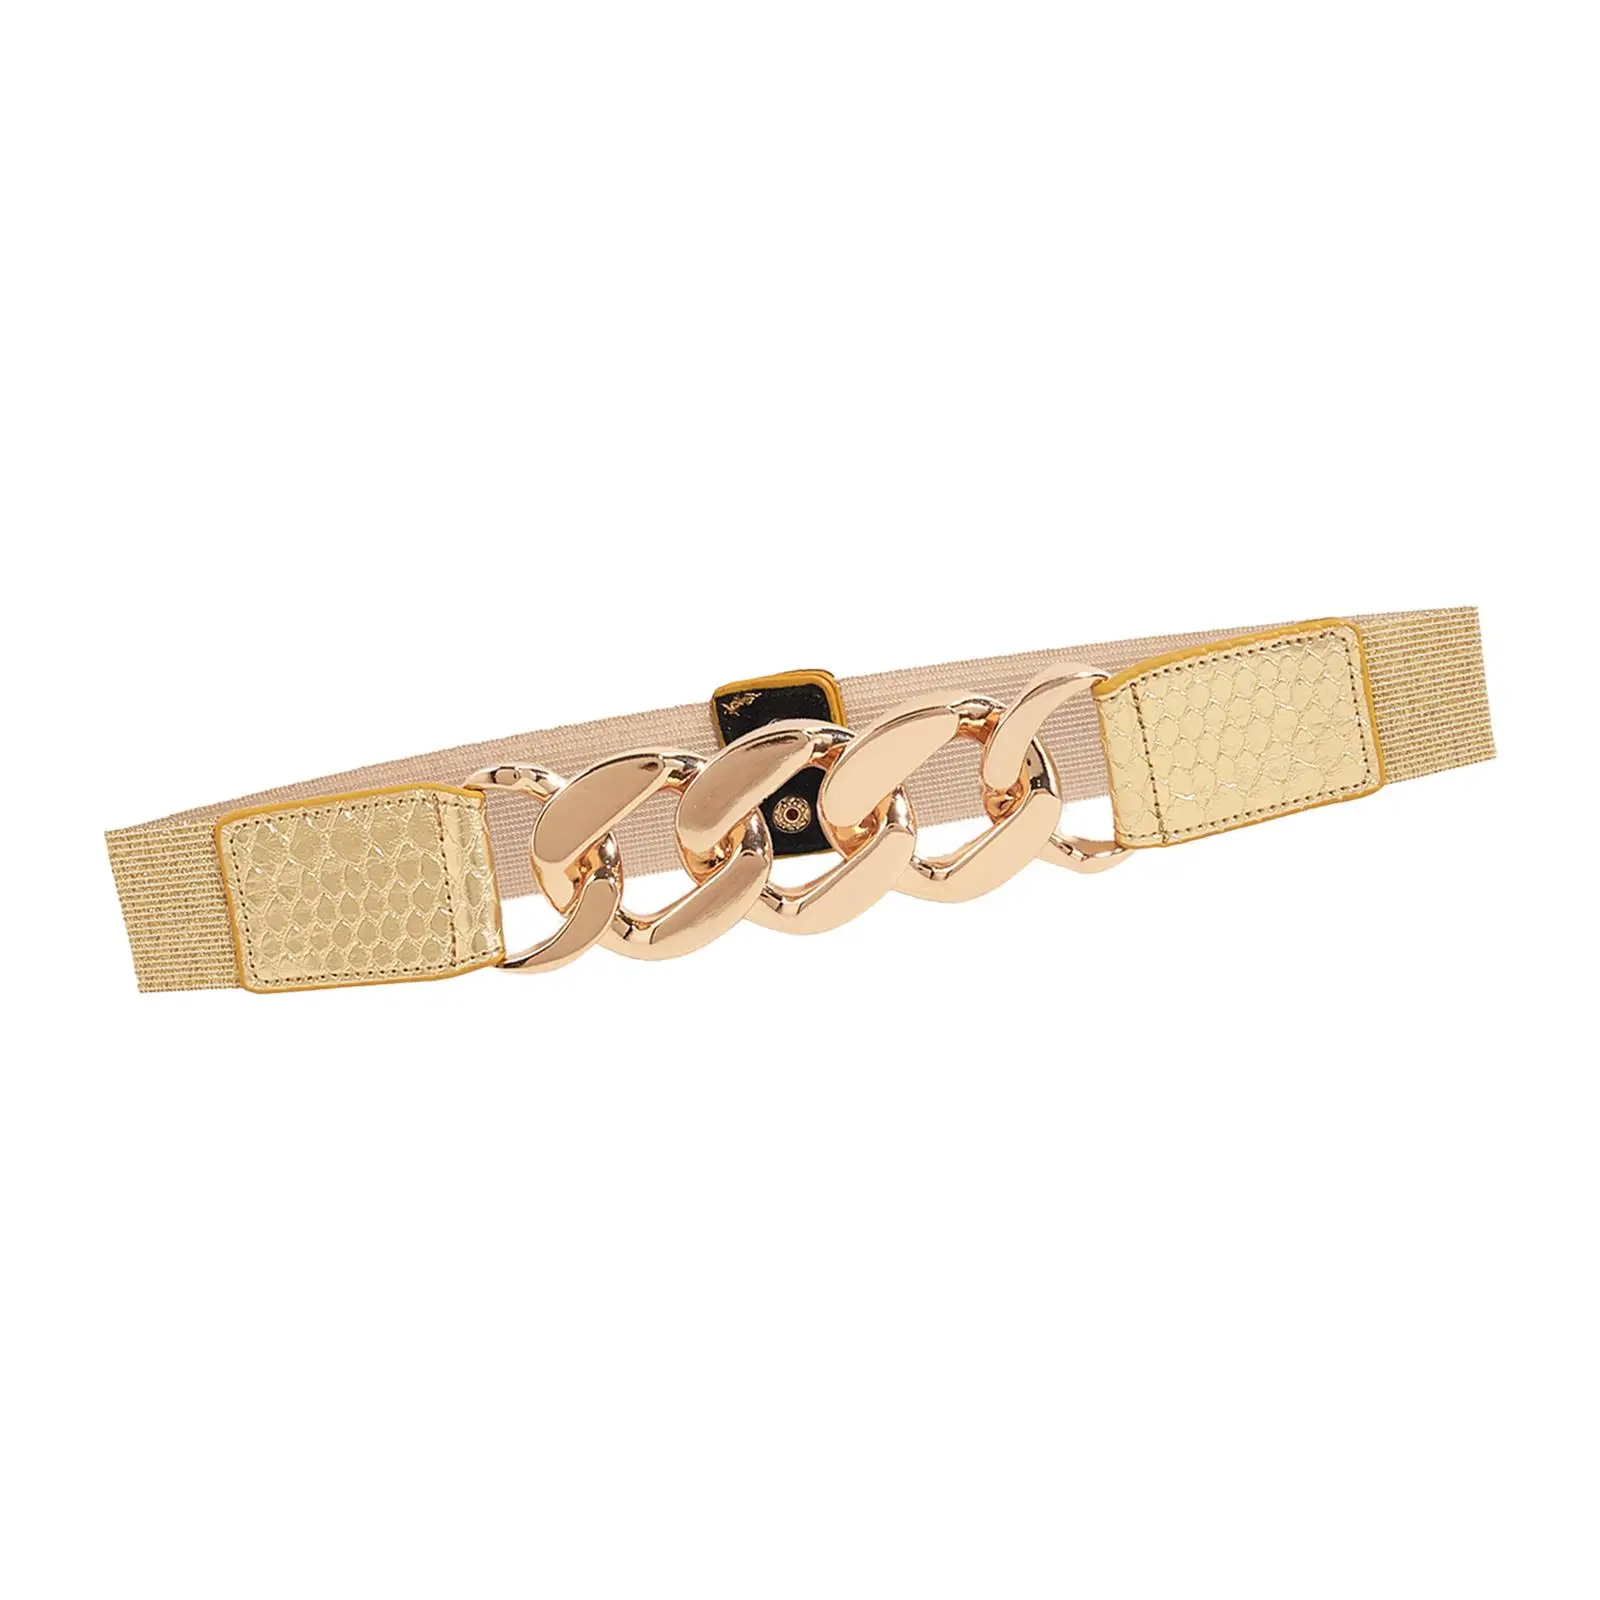 Fashionable Women`s Waist Belts with Chic Metal Chain Detailing